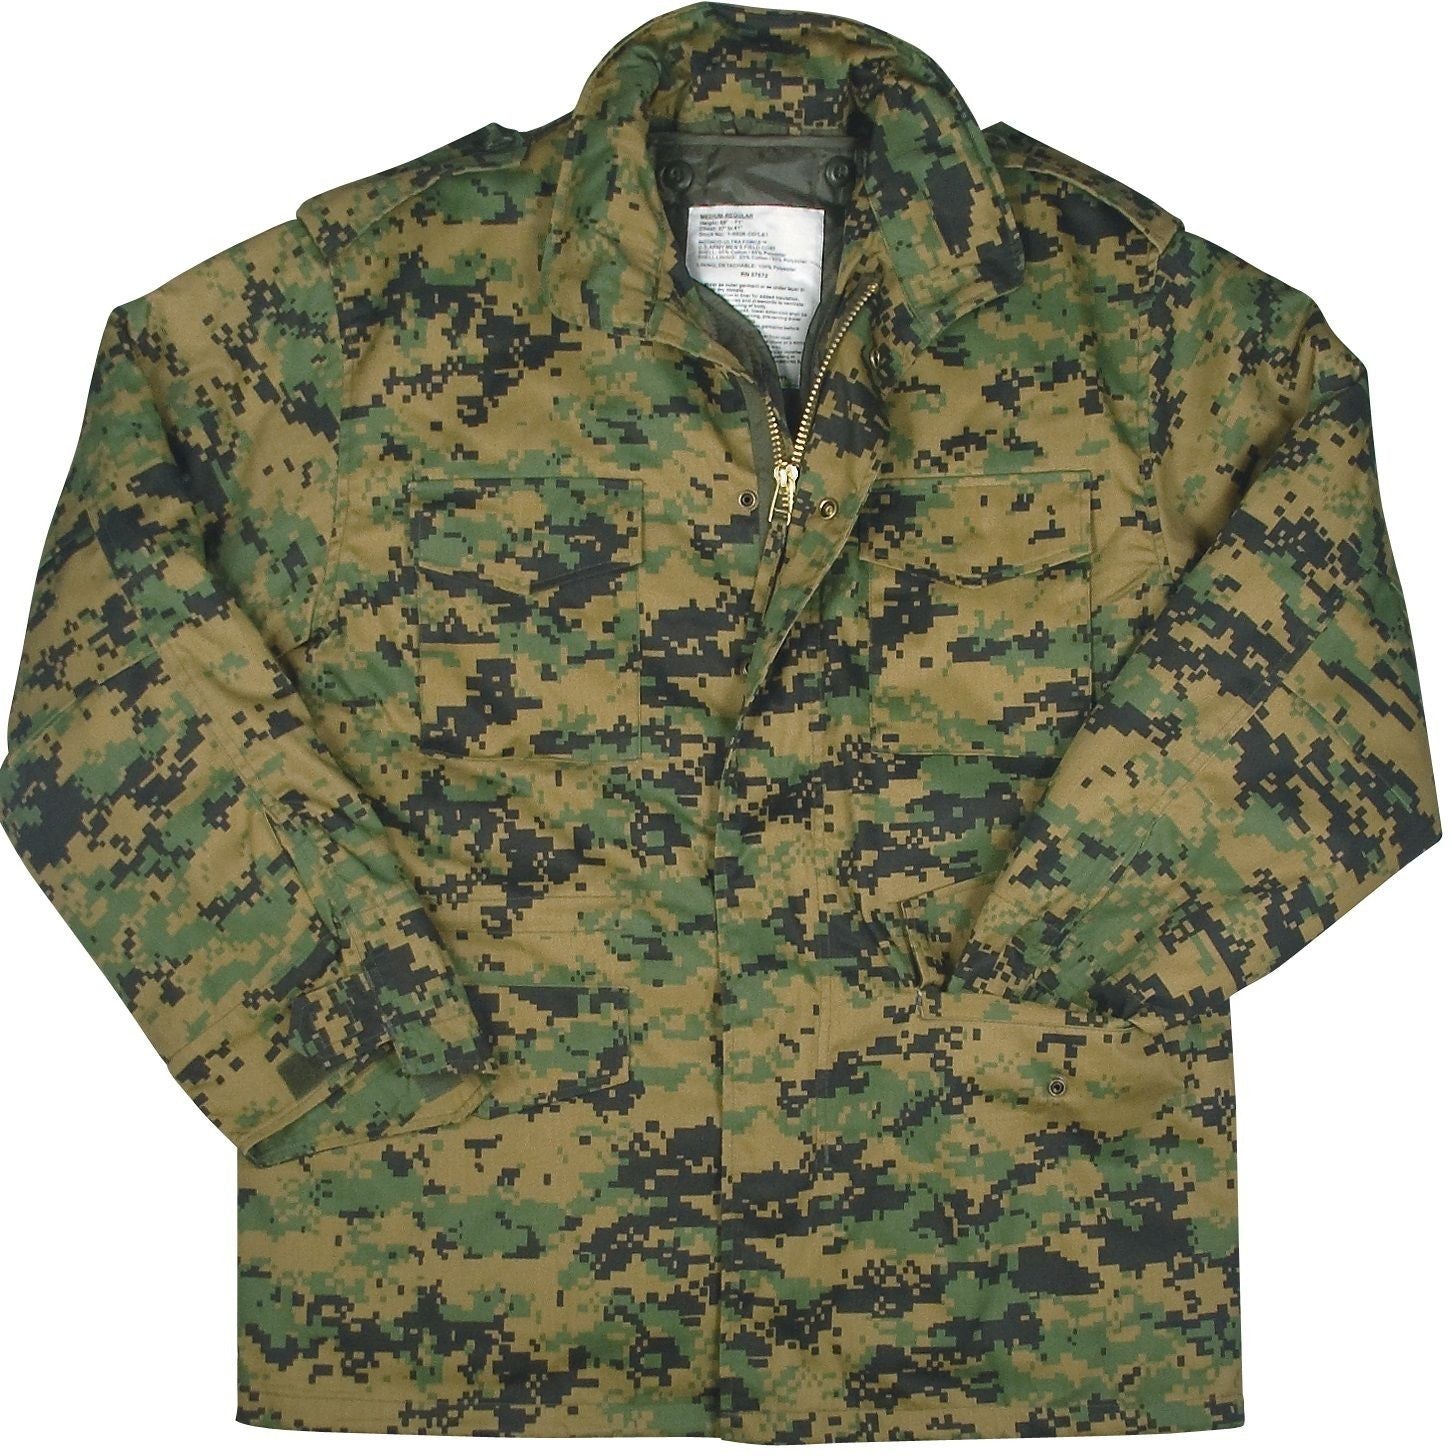 M-65 Field Jacket Military Army Tactical Field Combat M65 with Liner b ...